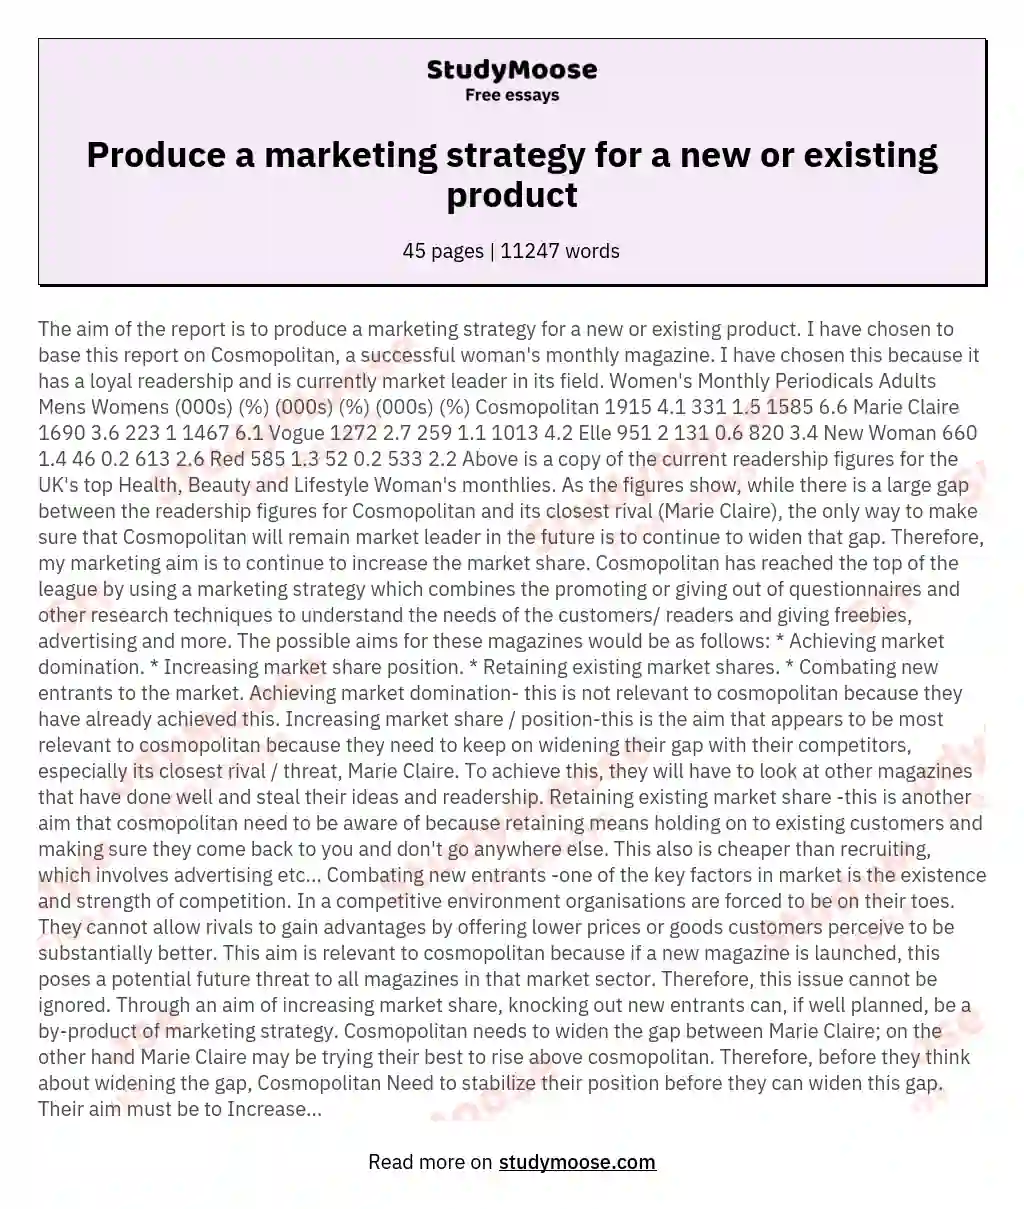 Produce a marketing strategy for a new or existing product essay